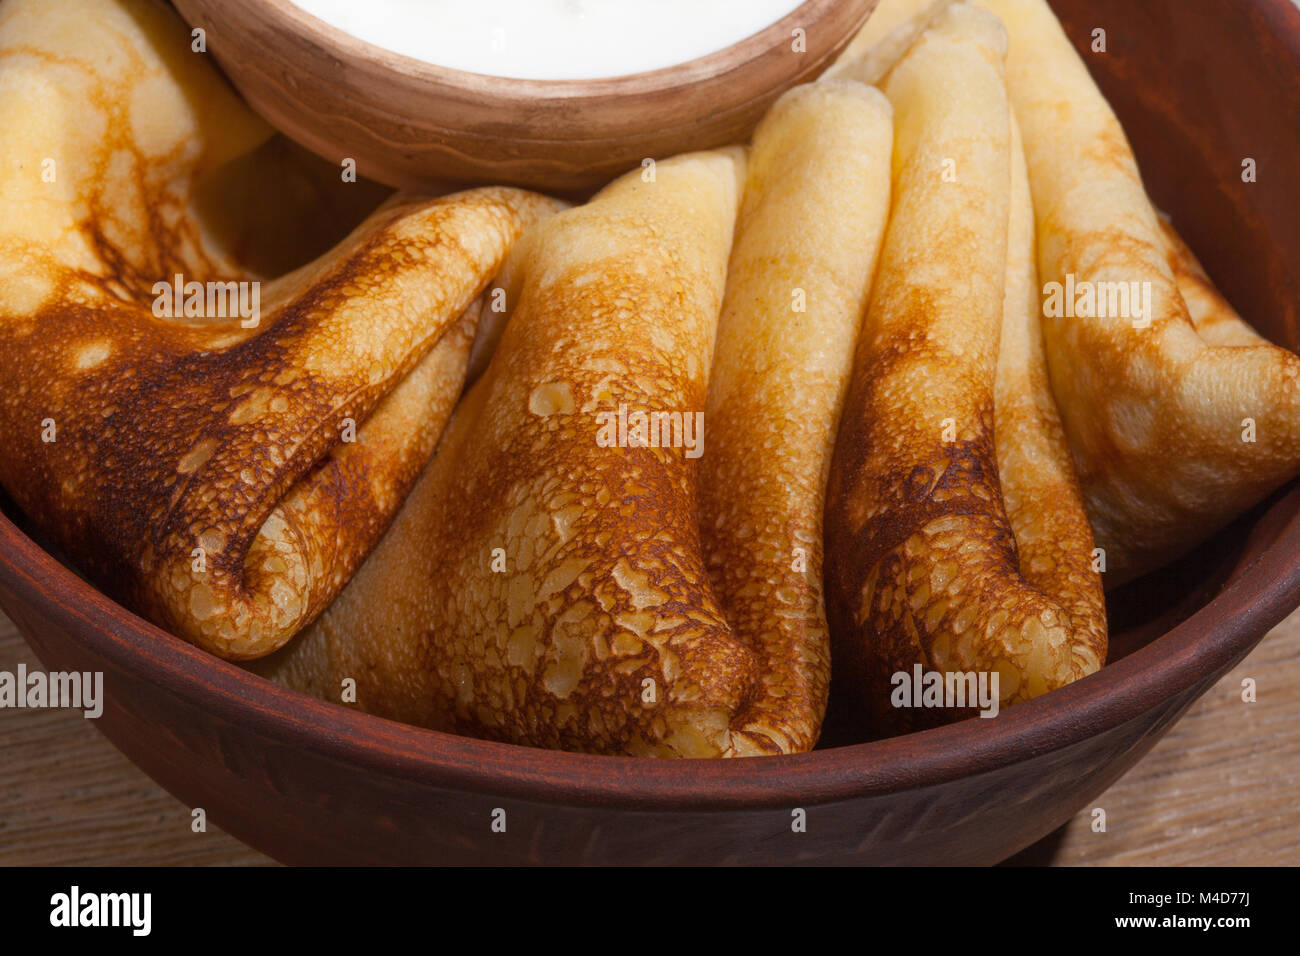 traditional oily food in vintage style: pancakes with sour cream in and a clay dish with a wooden spoon on an oak table Stock Photo